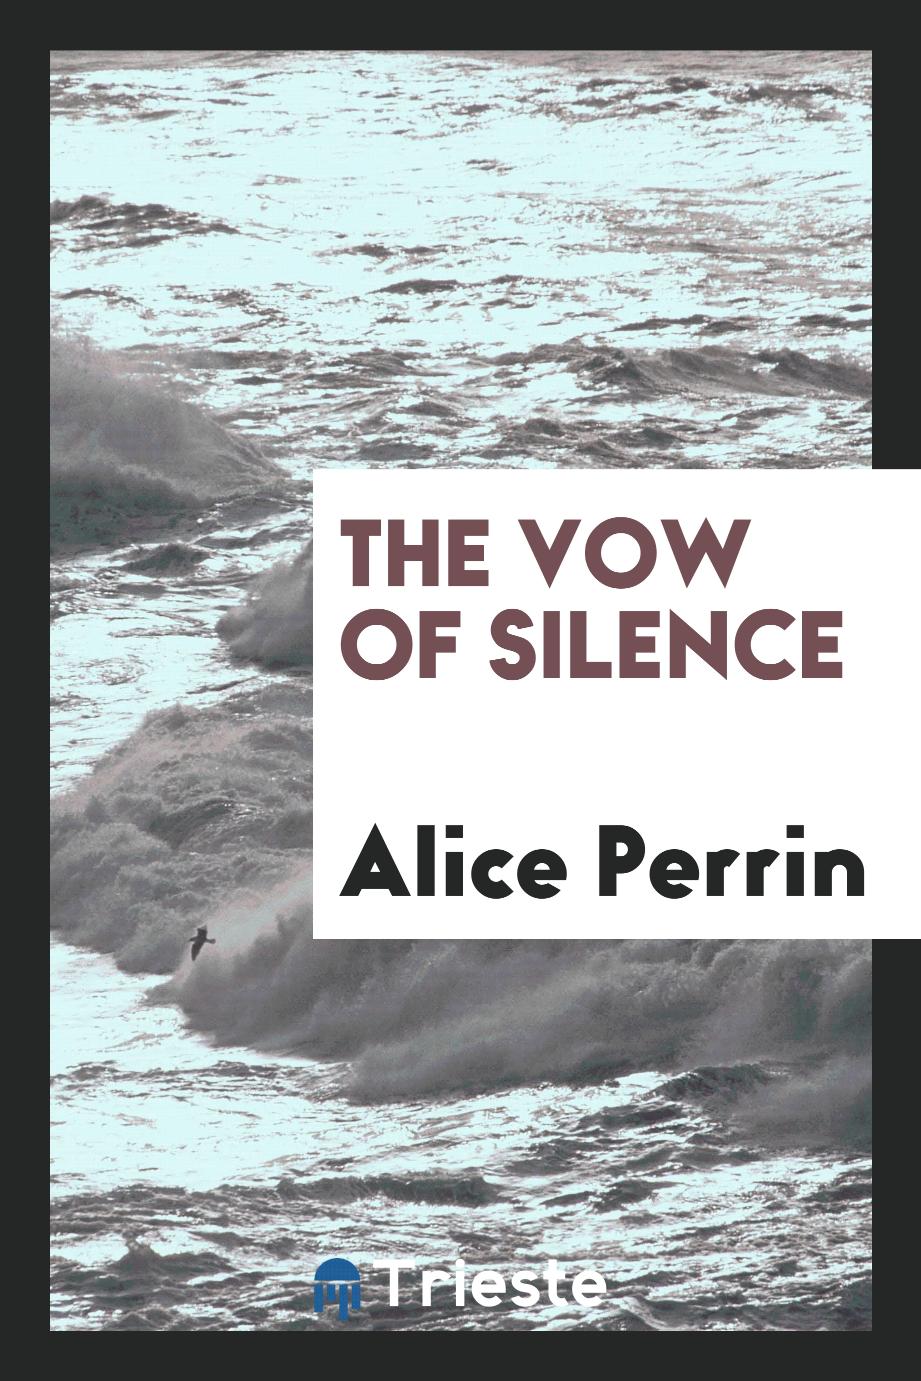 The vow of silence